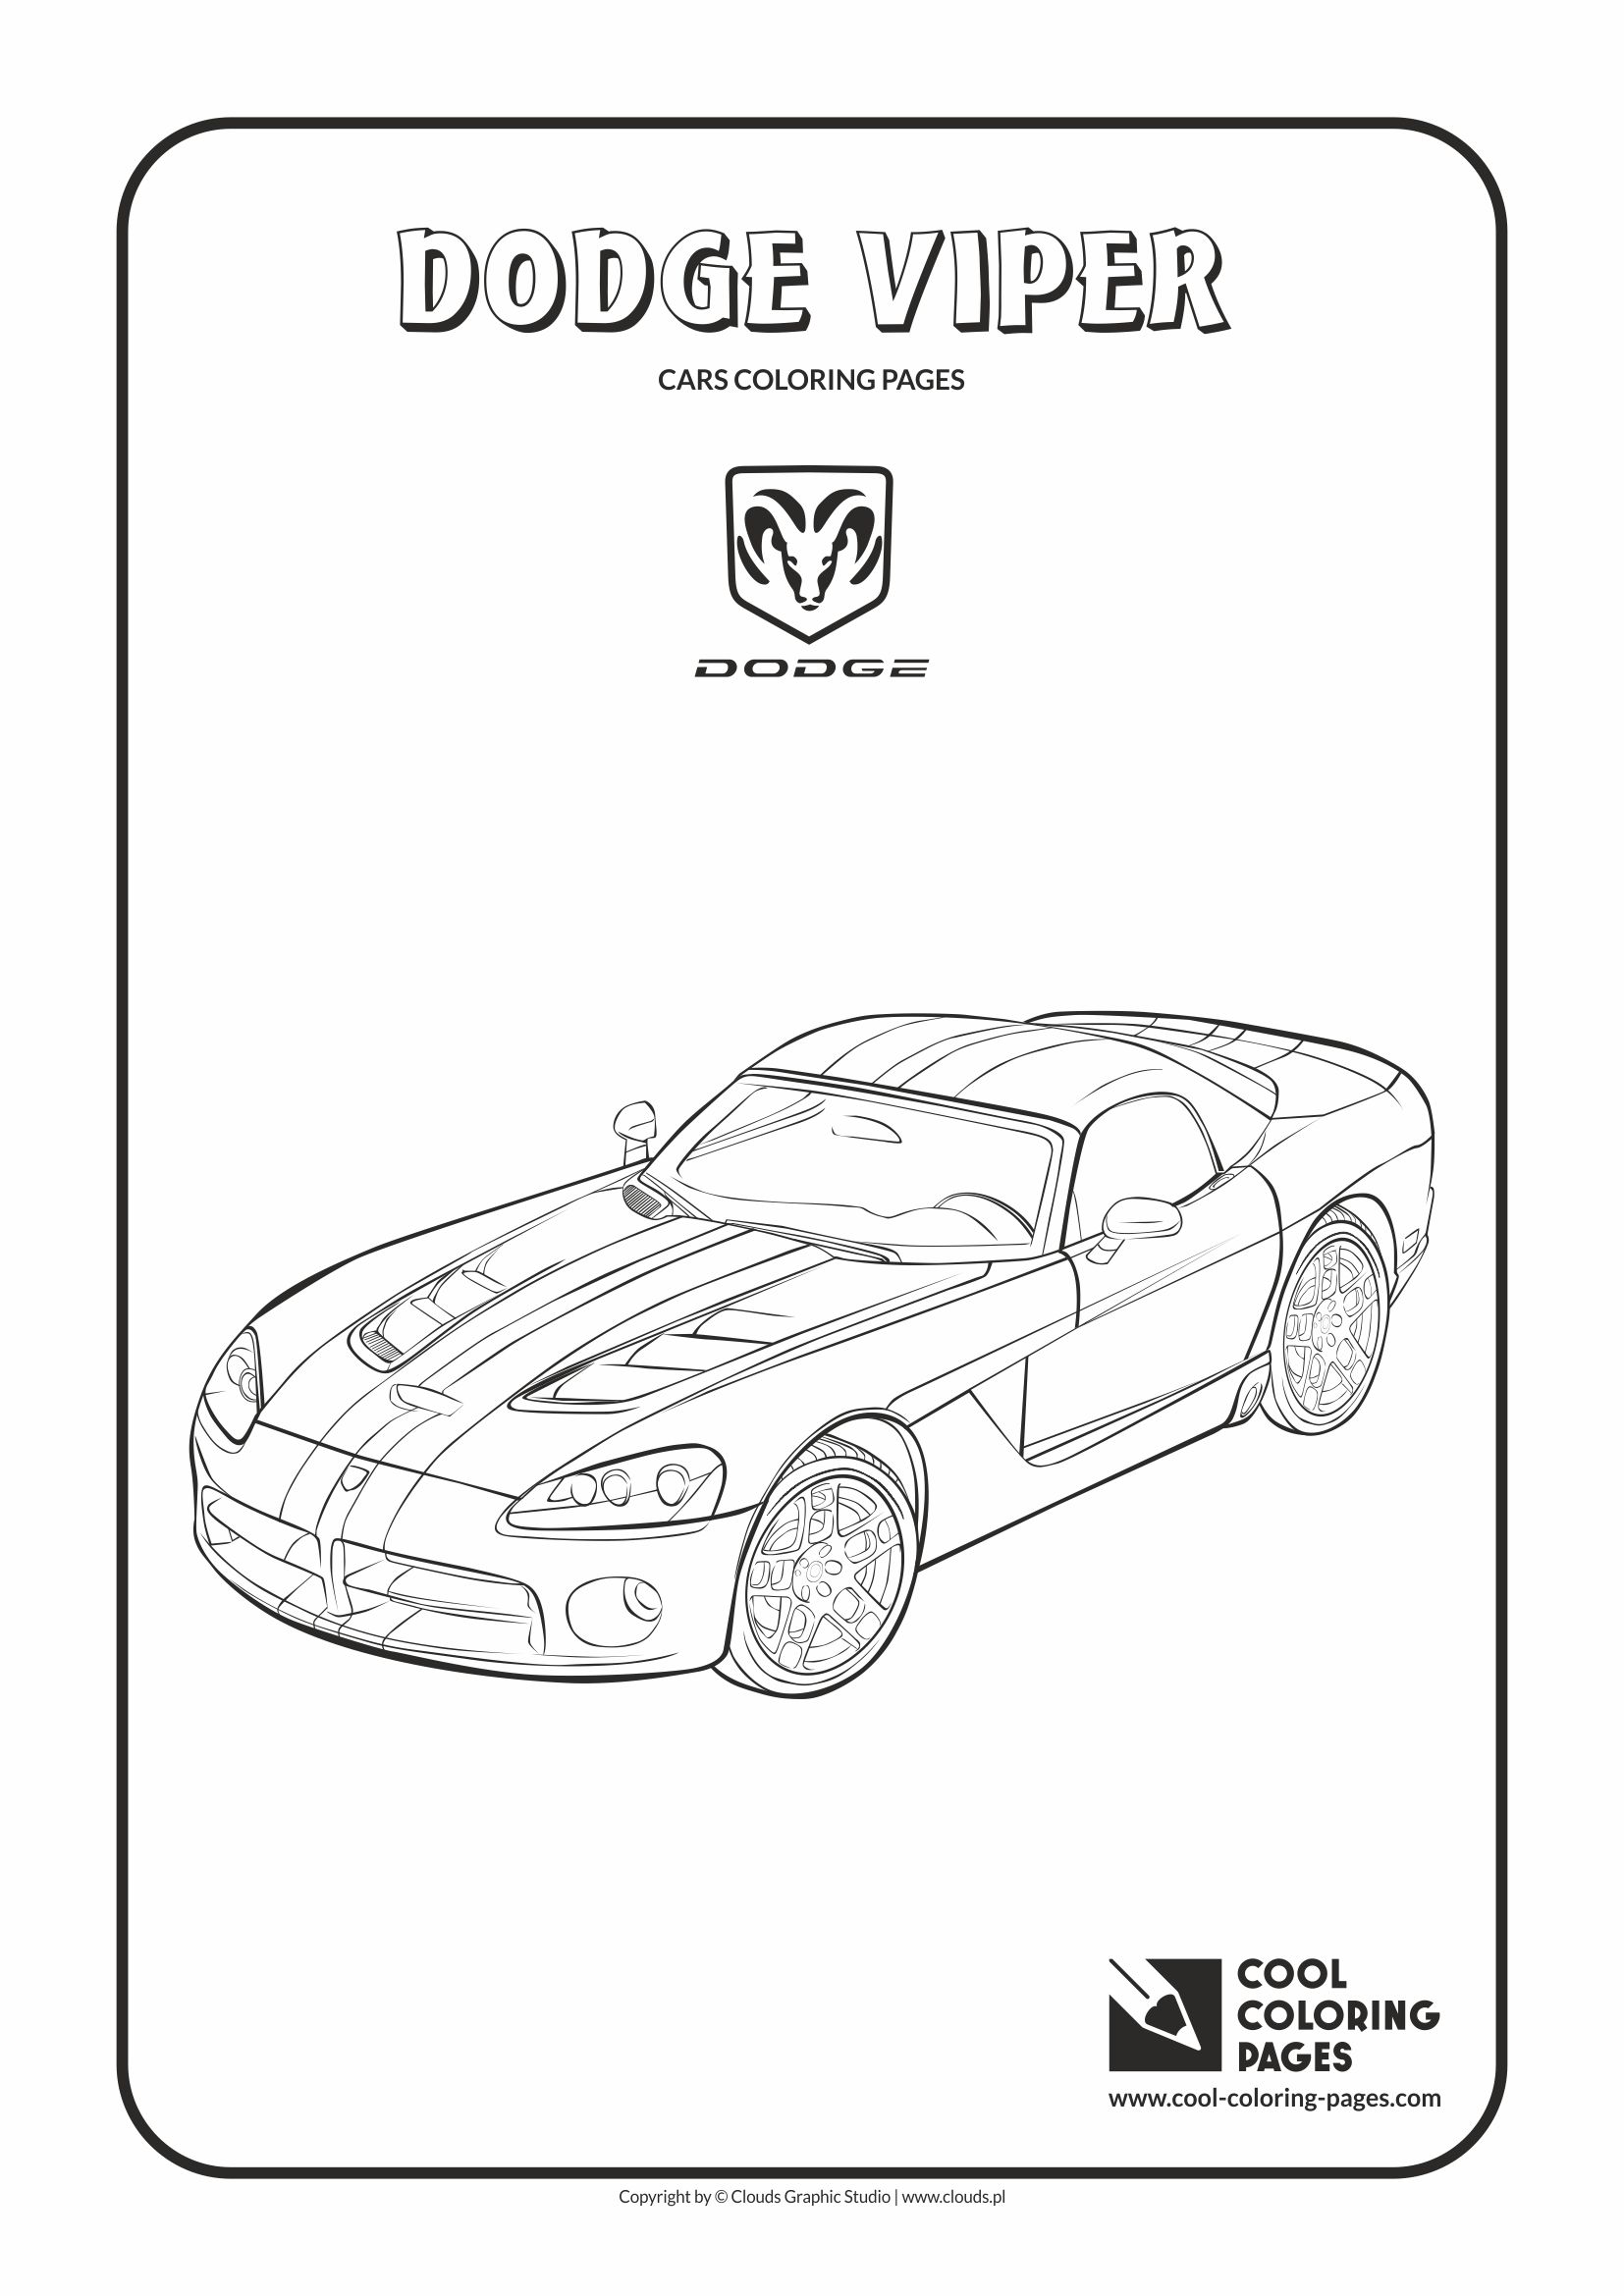 Cool Coloring Pages - Vehicles / Dodge Viper / Coloring page with Dodge Viper